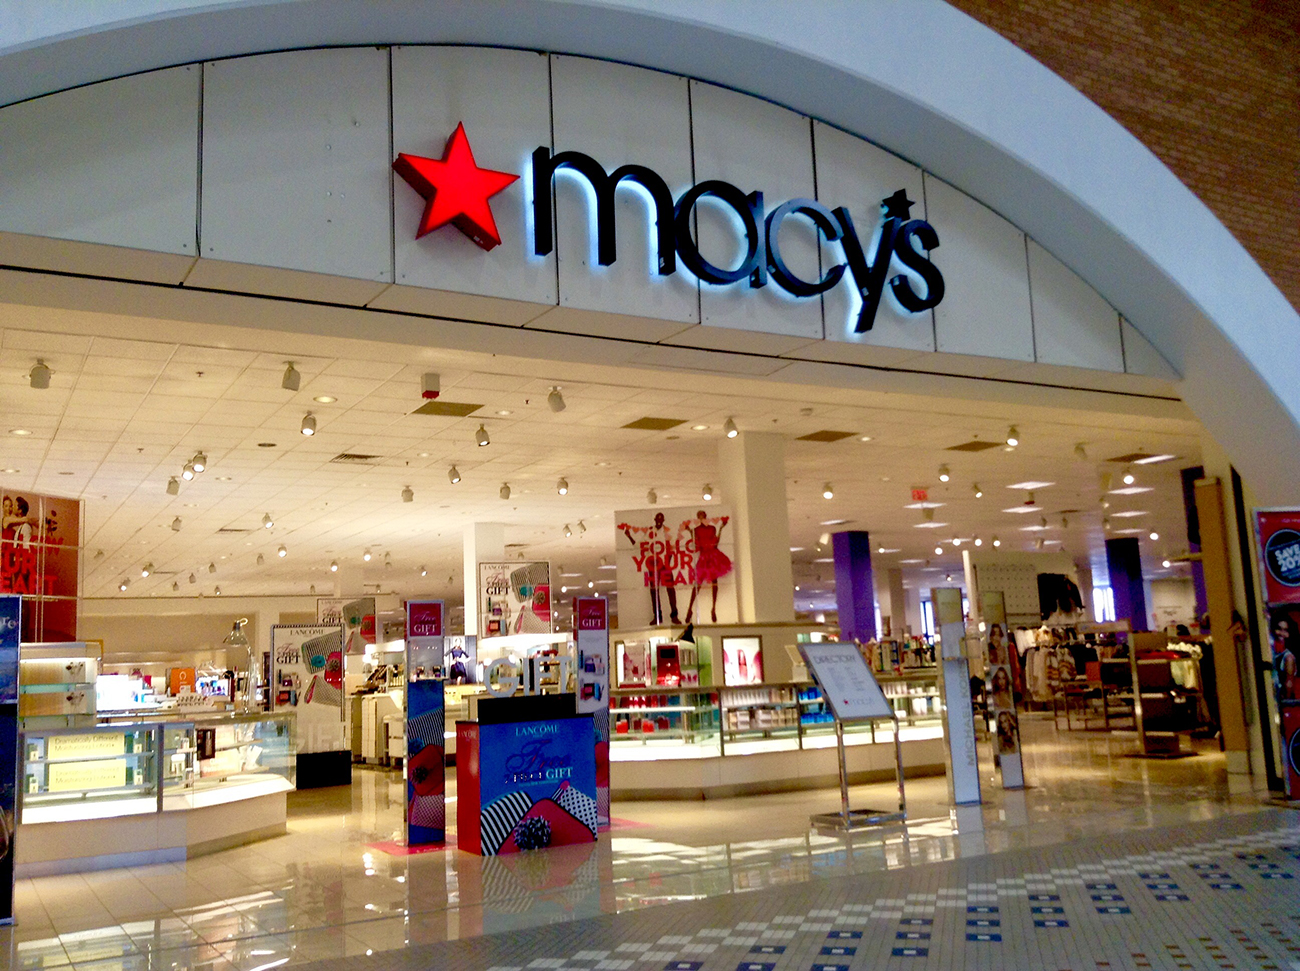 Photograph shows the brightly lit entrance to a Macy's department store.